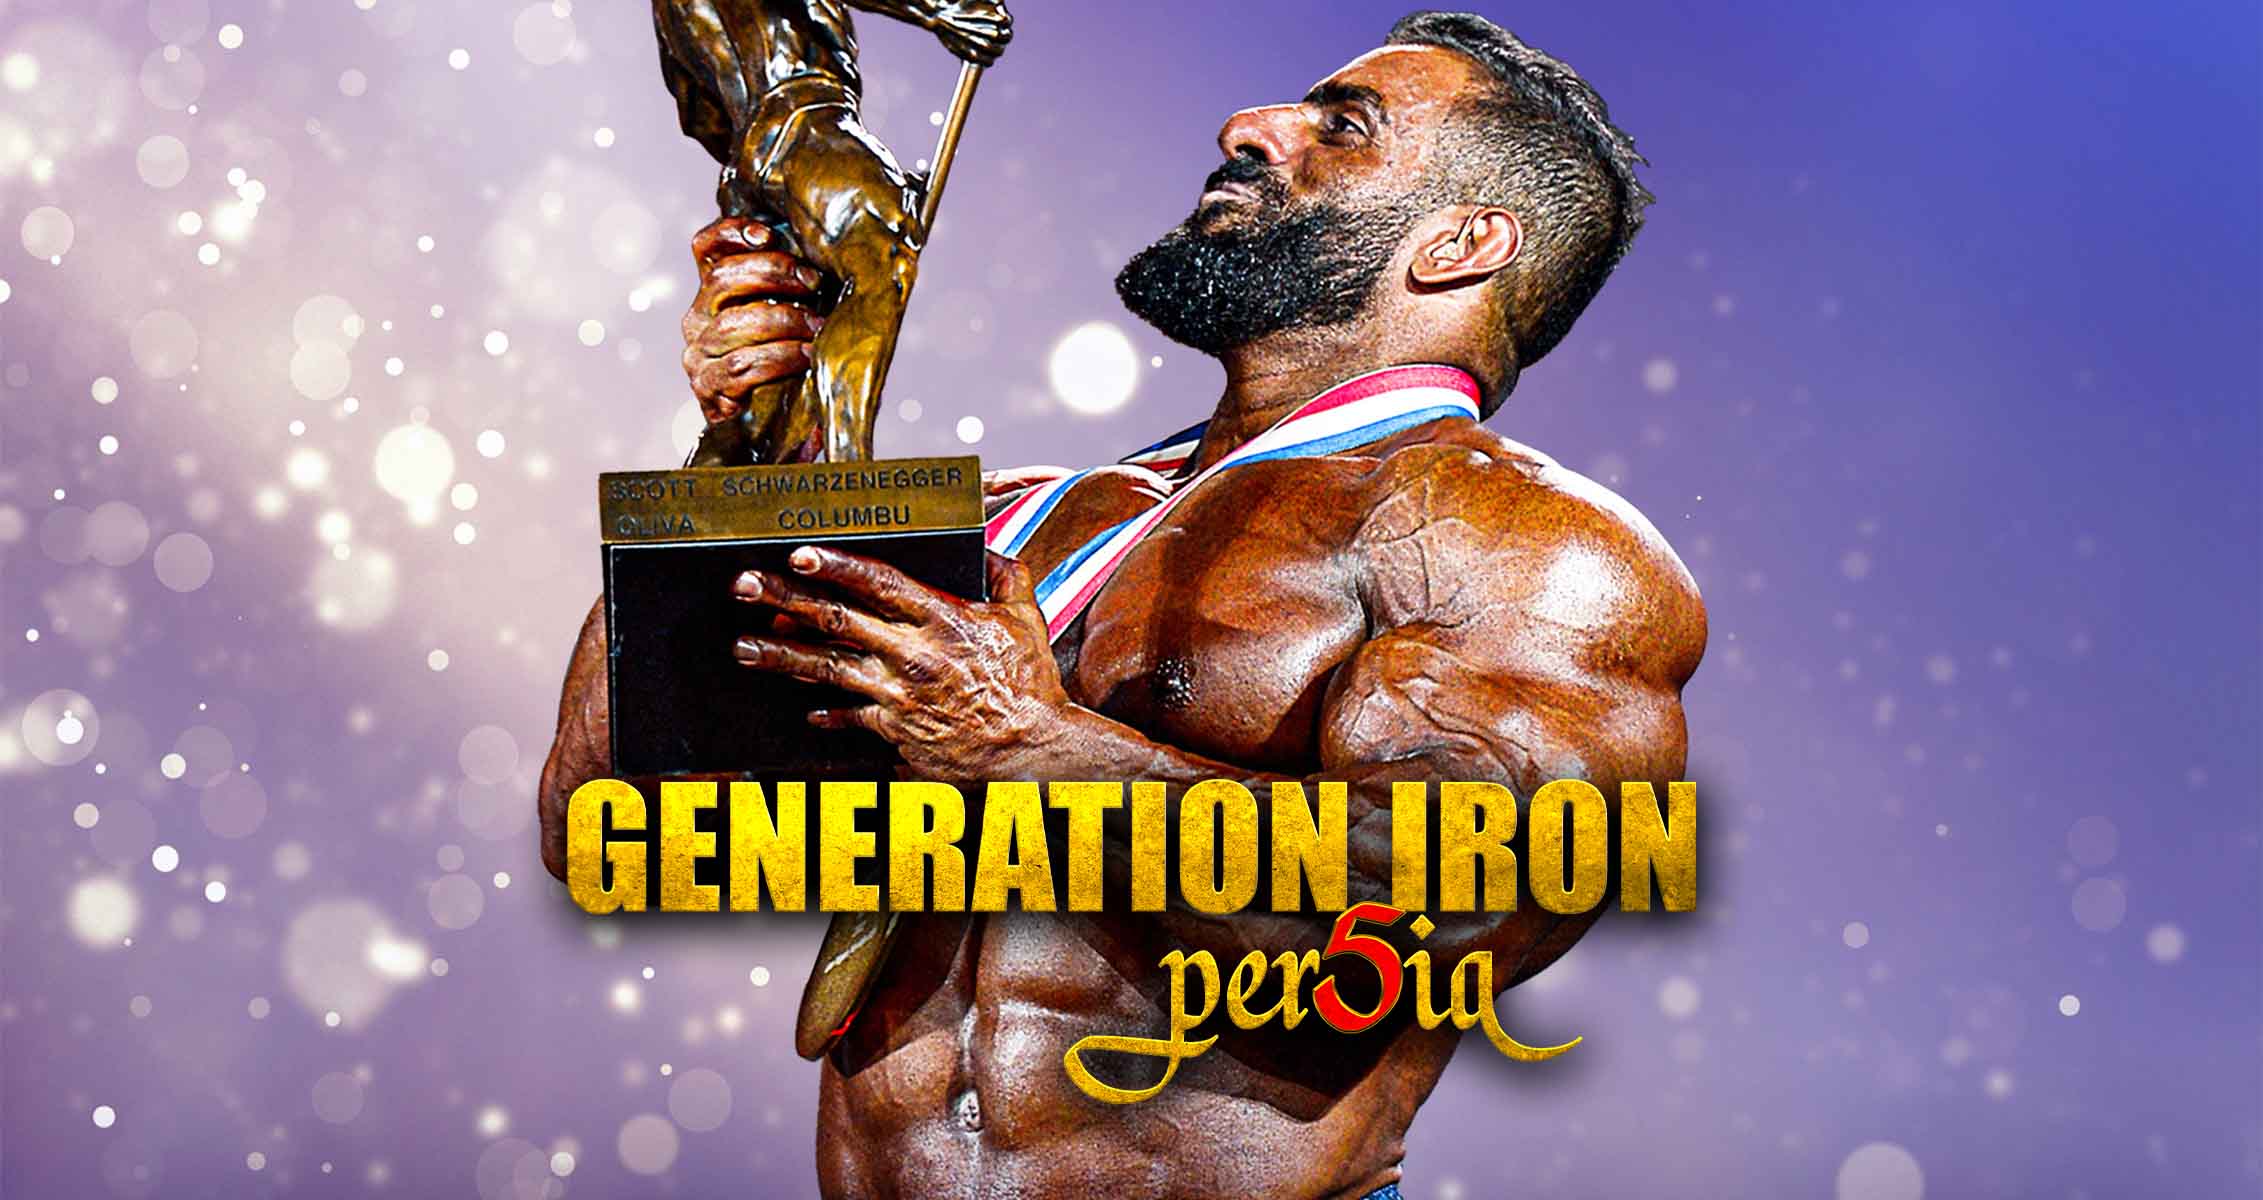 WATCH: 'Generation Persia' Official Trailer